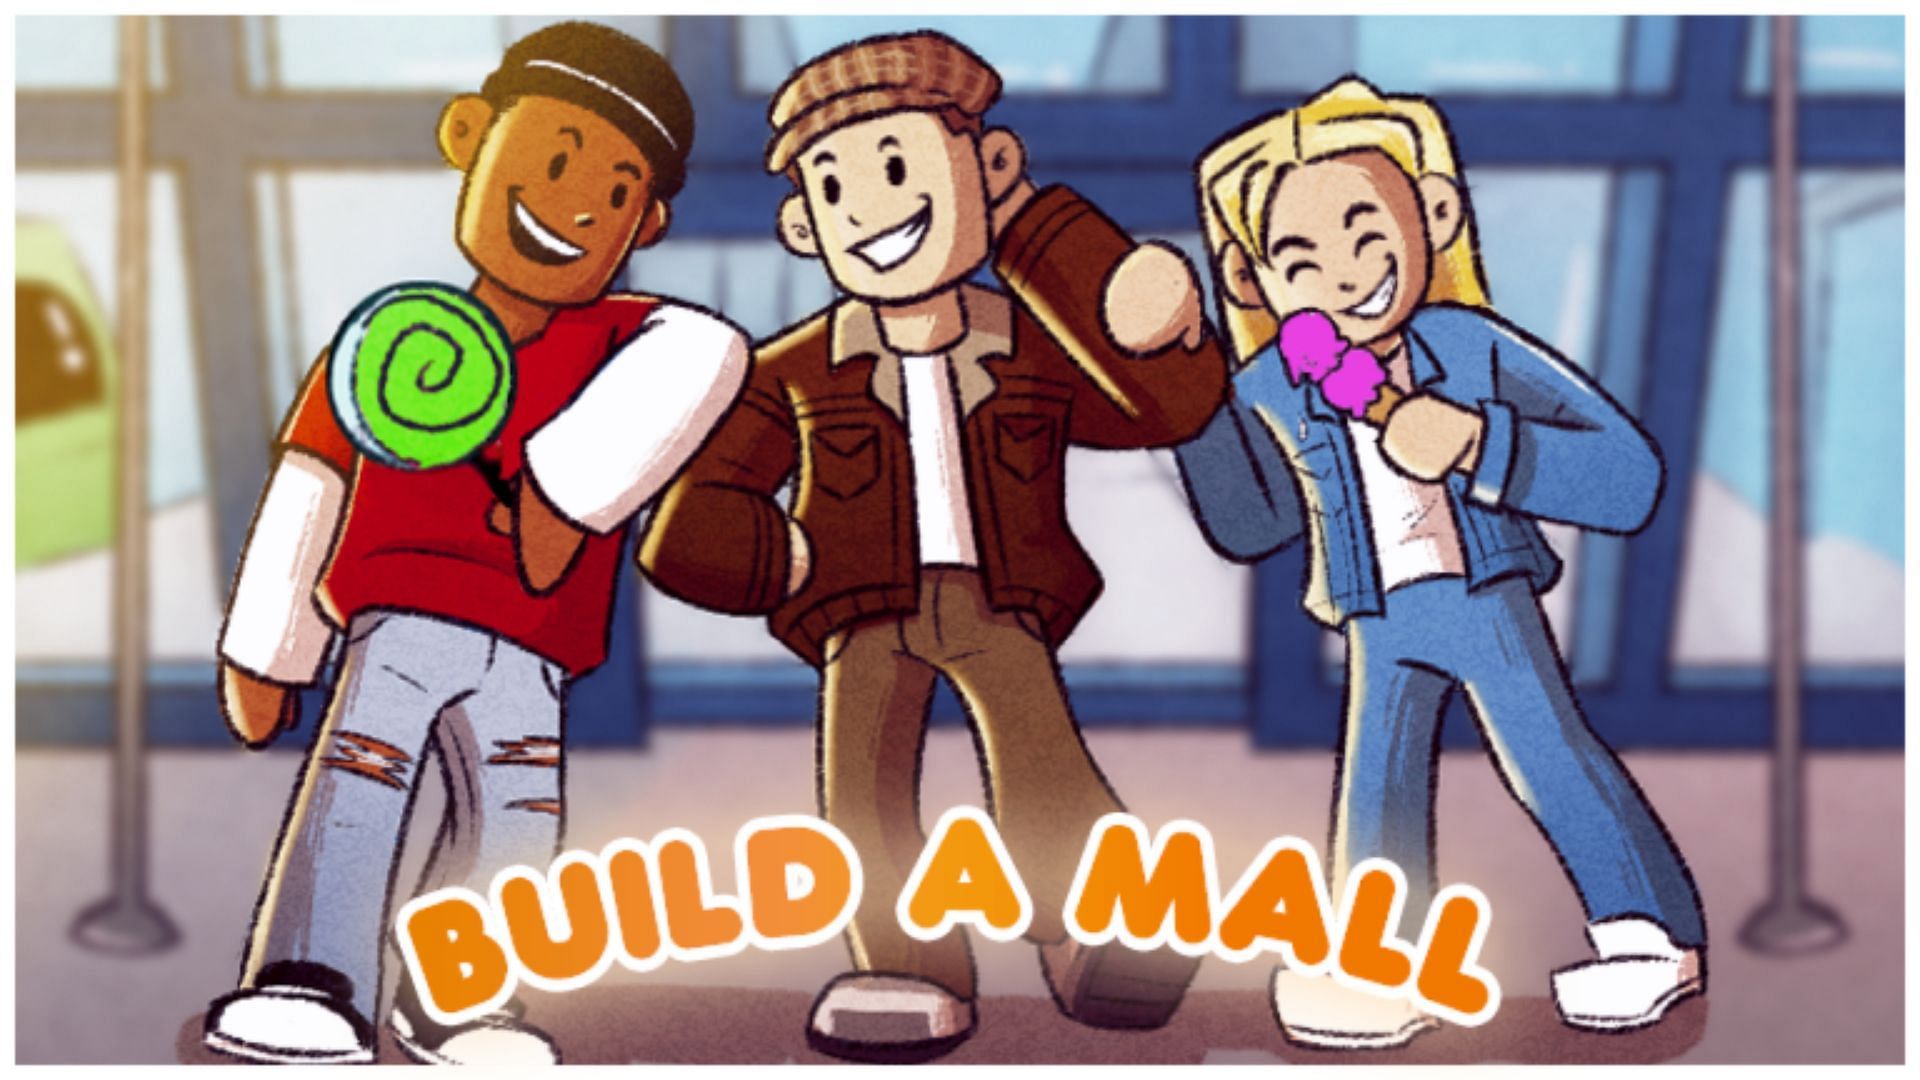 Codes for Mall Tycoon and their importance (Image via Roblox)